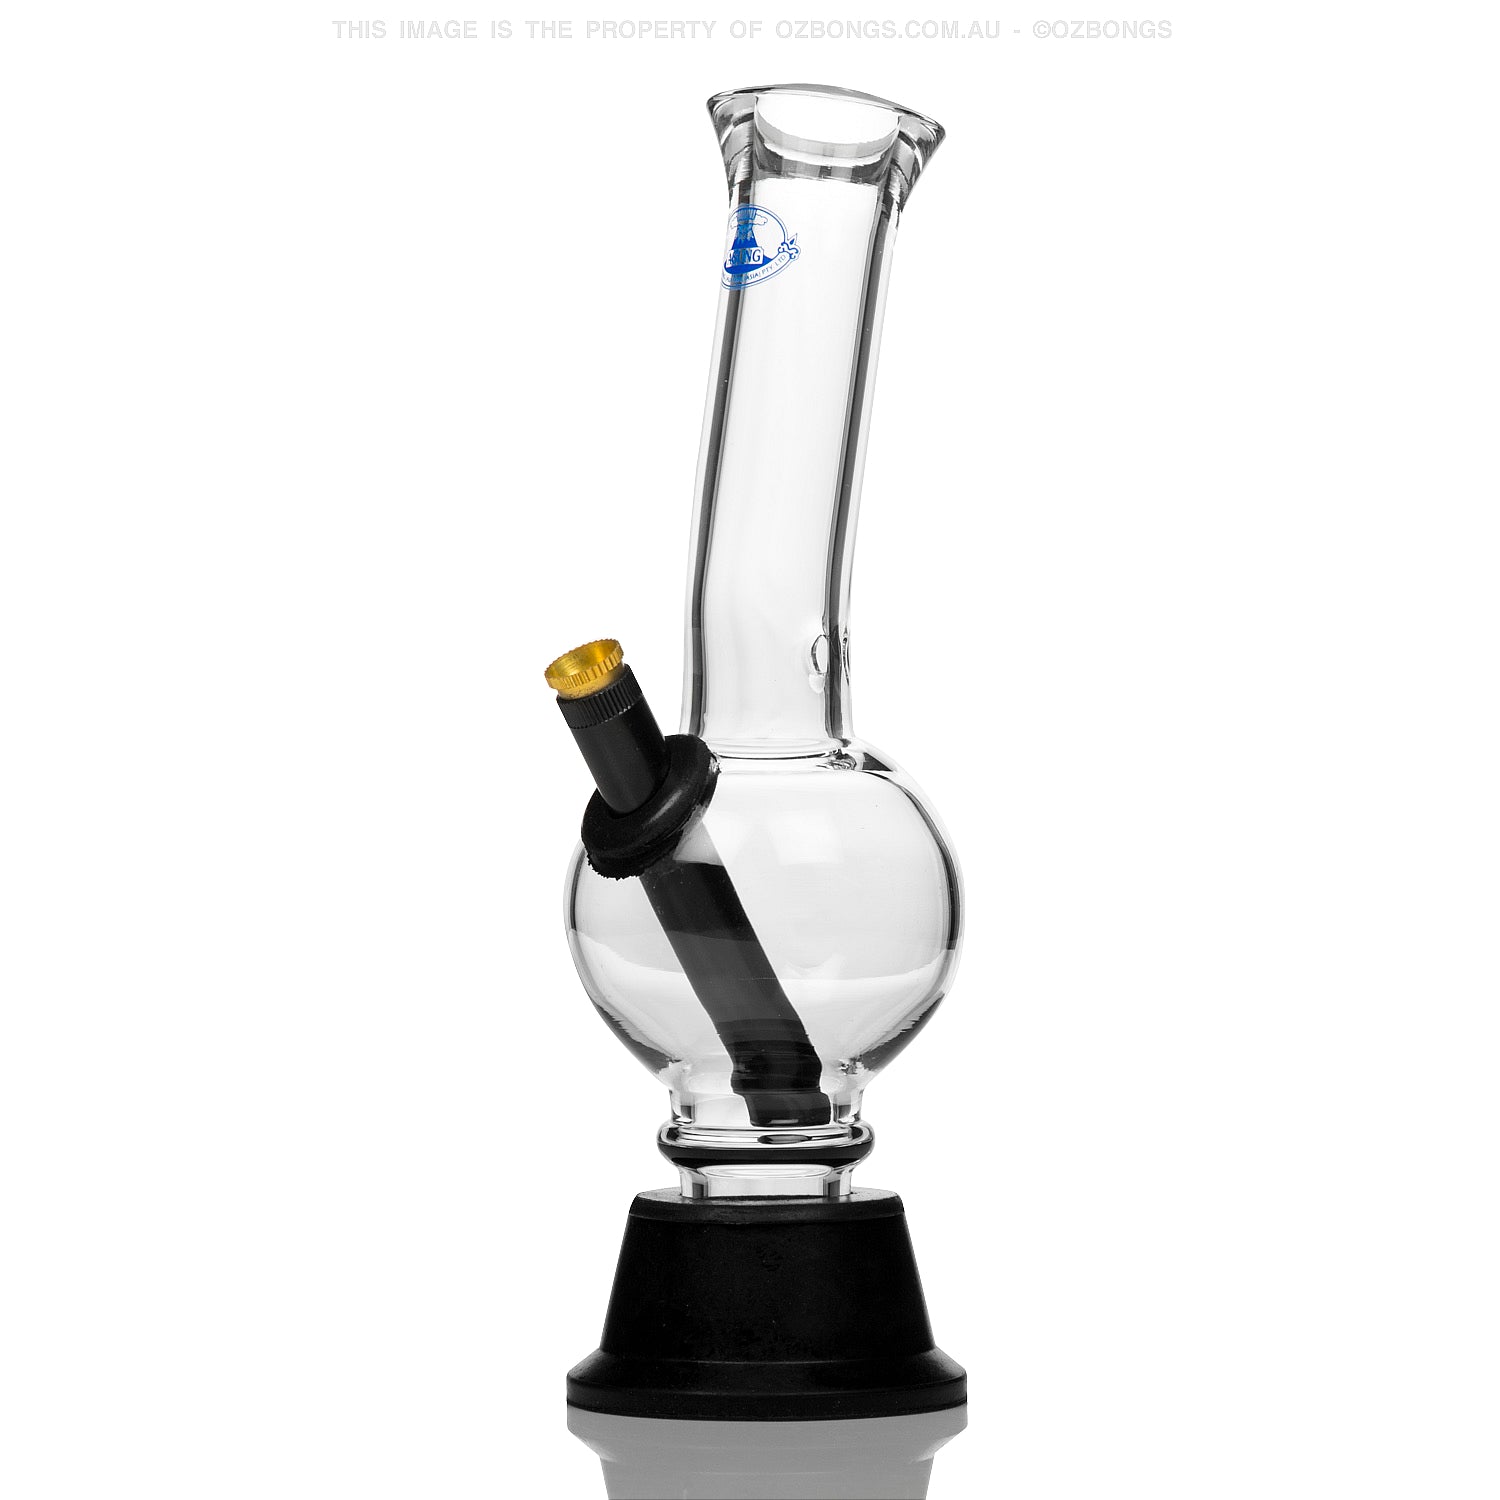 Agung heavy weight champ bong. Thicker and heavier than other Aussie style bongs.